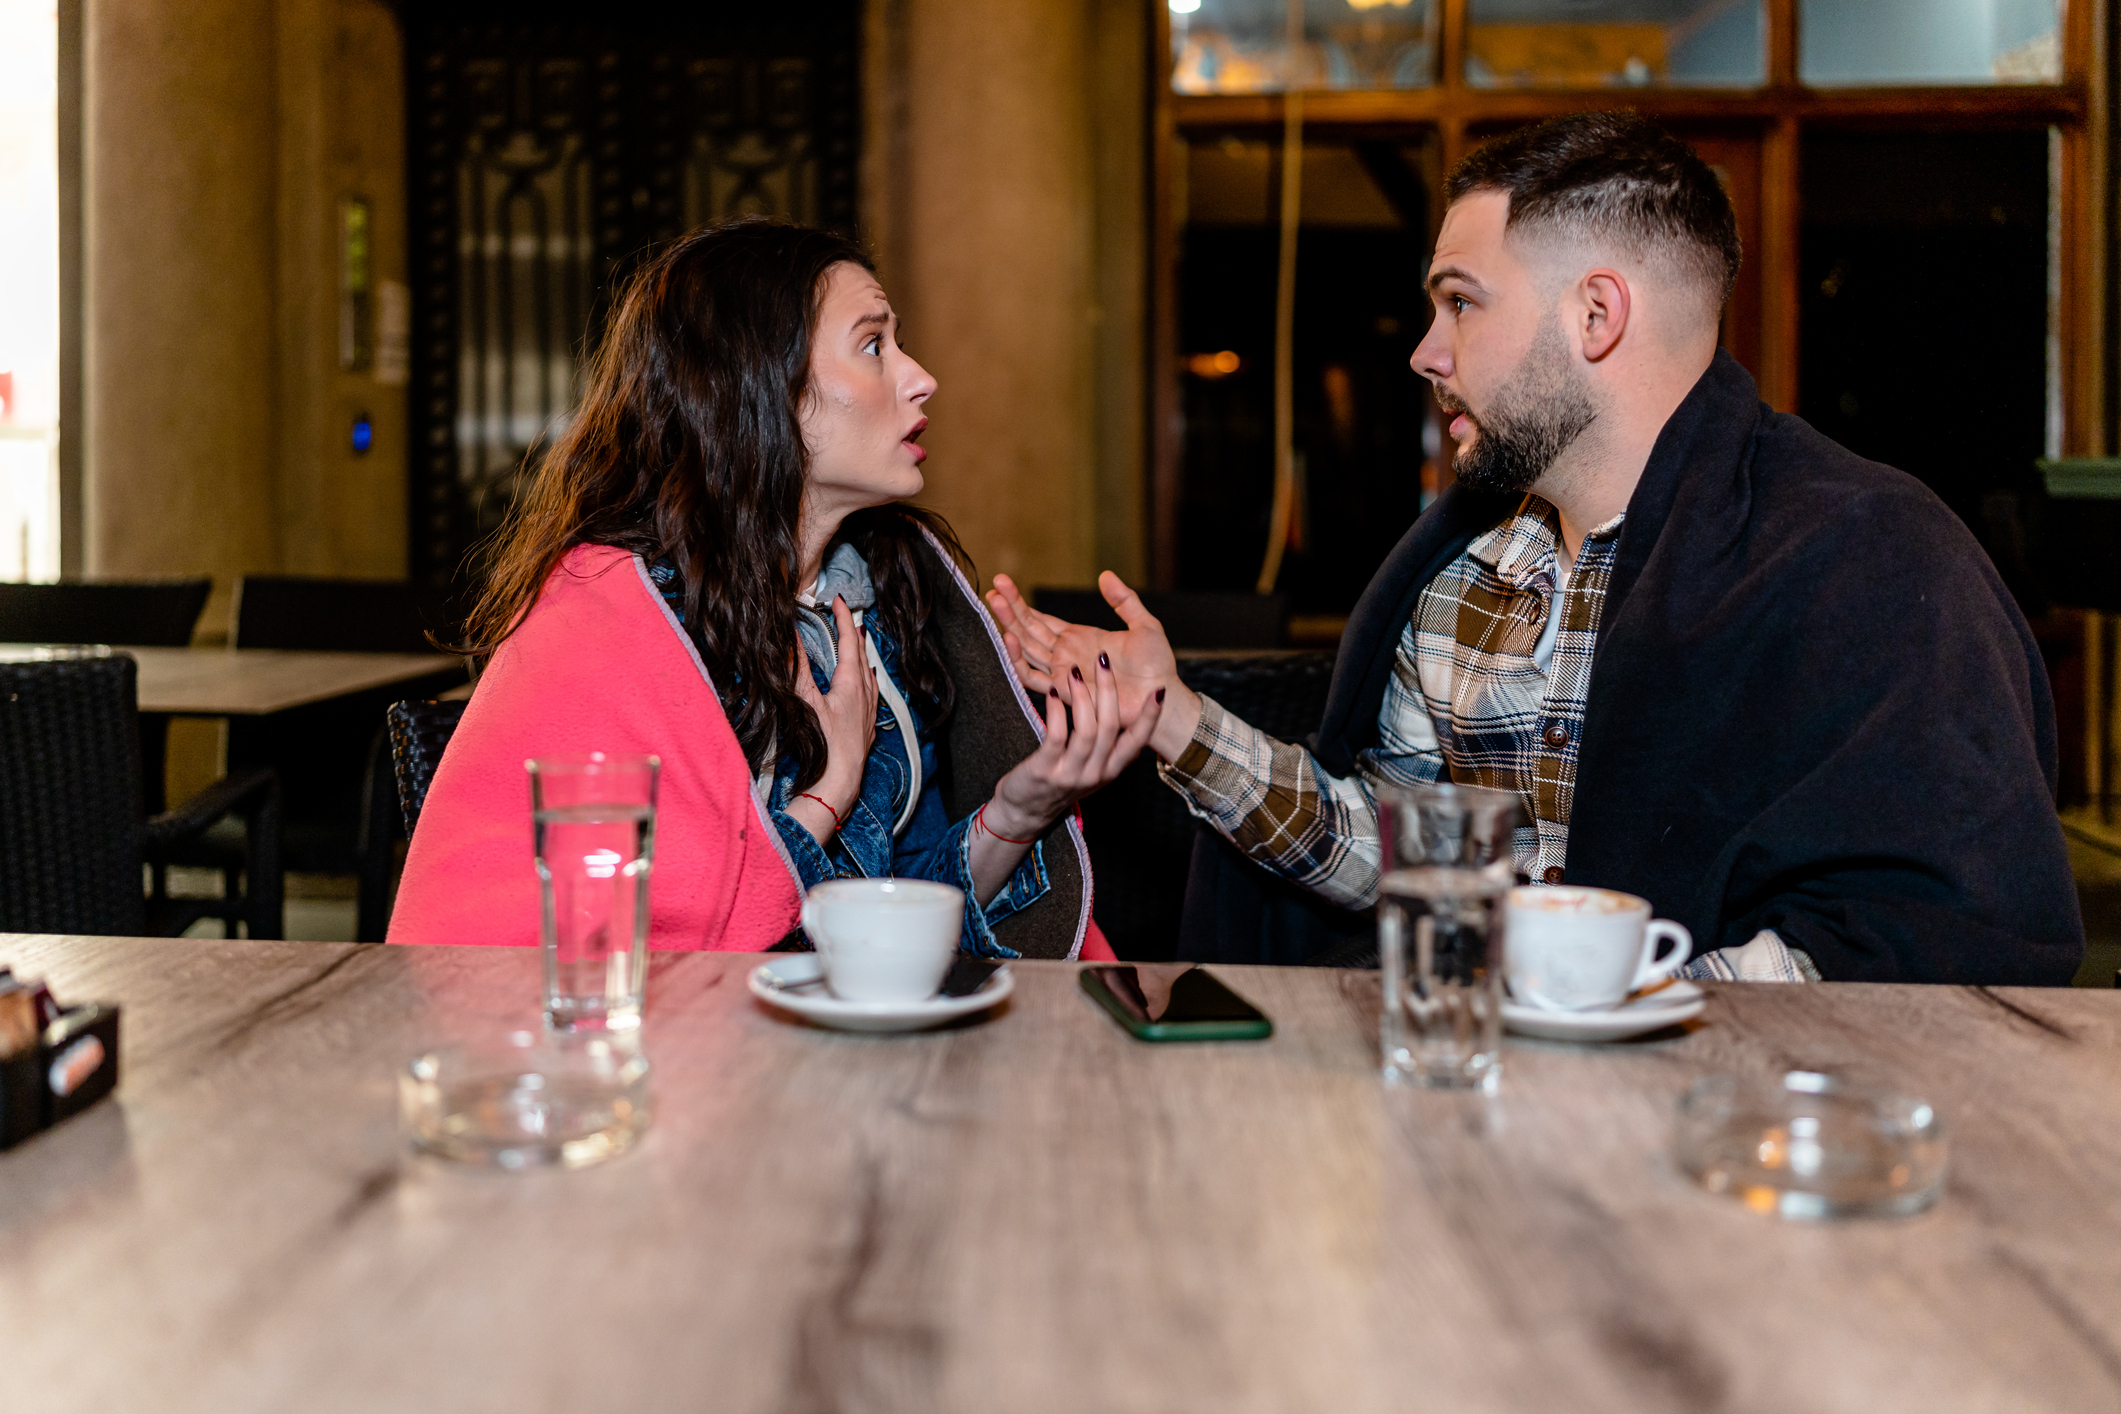 Two people engaged in a conversation at a cafe table with drinks and a phone visible